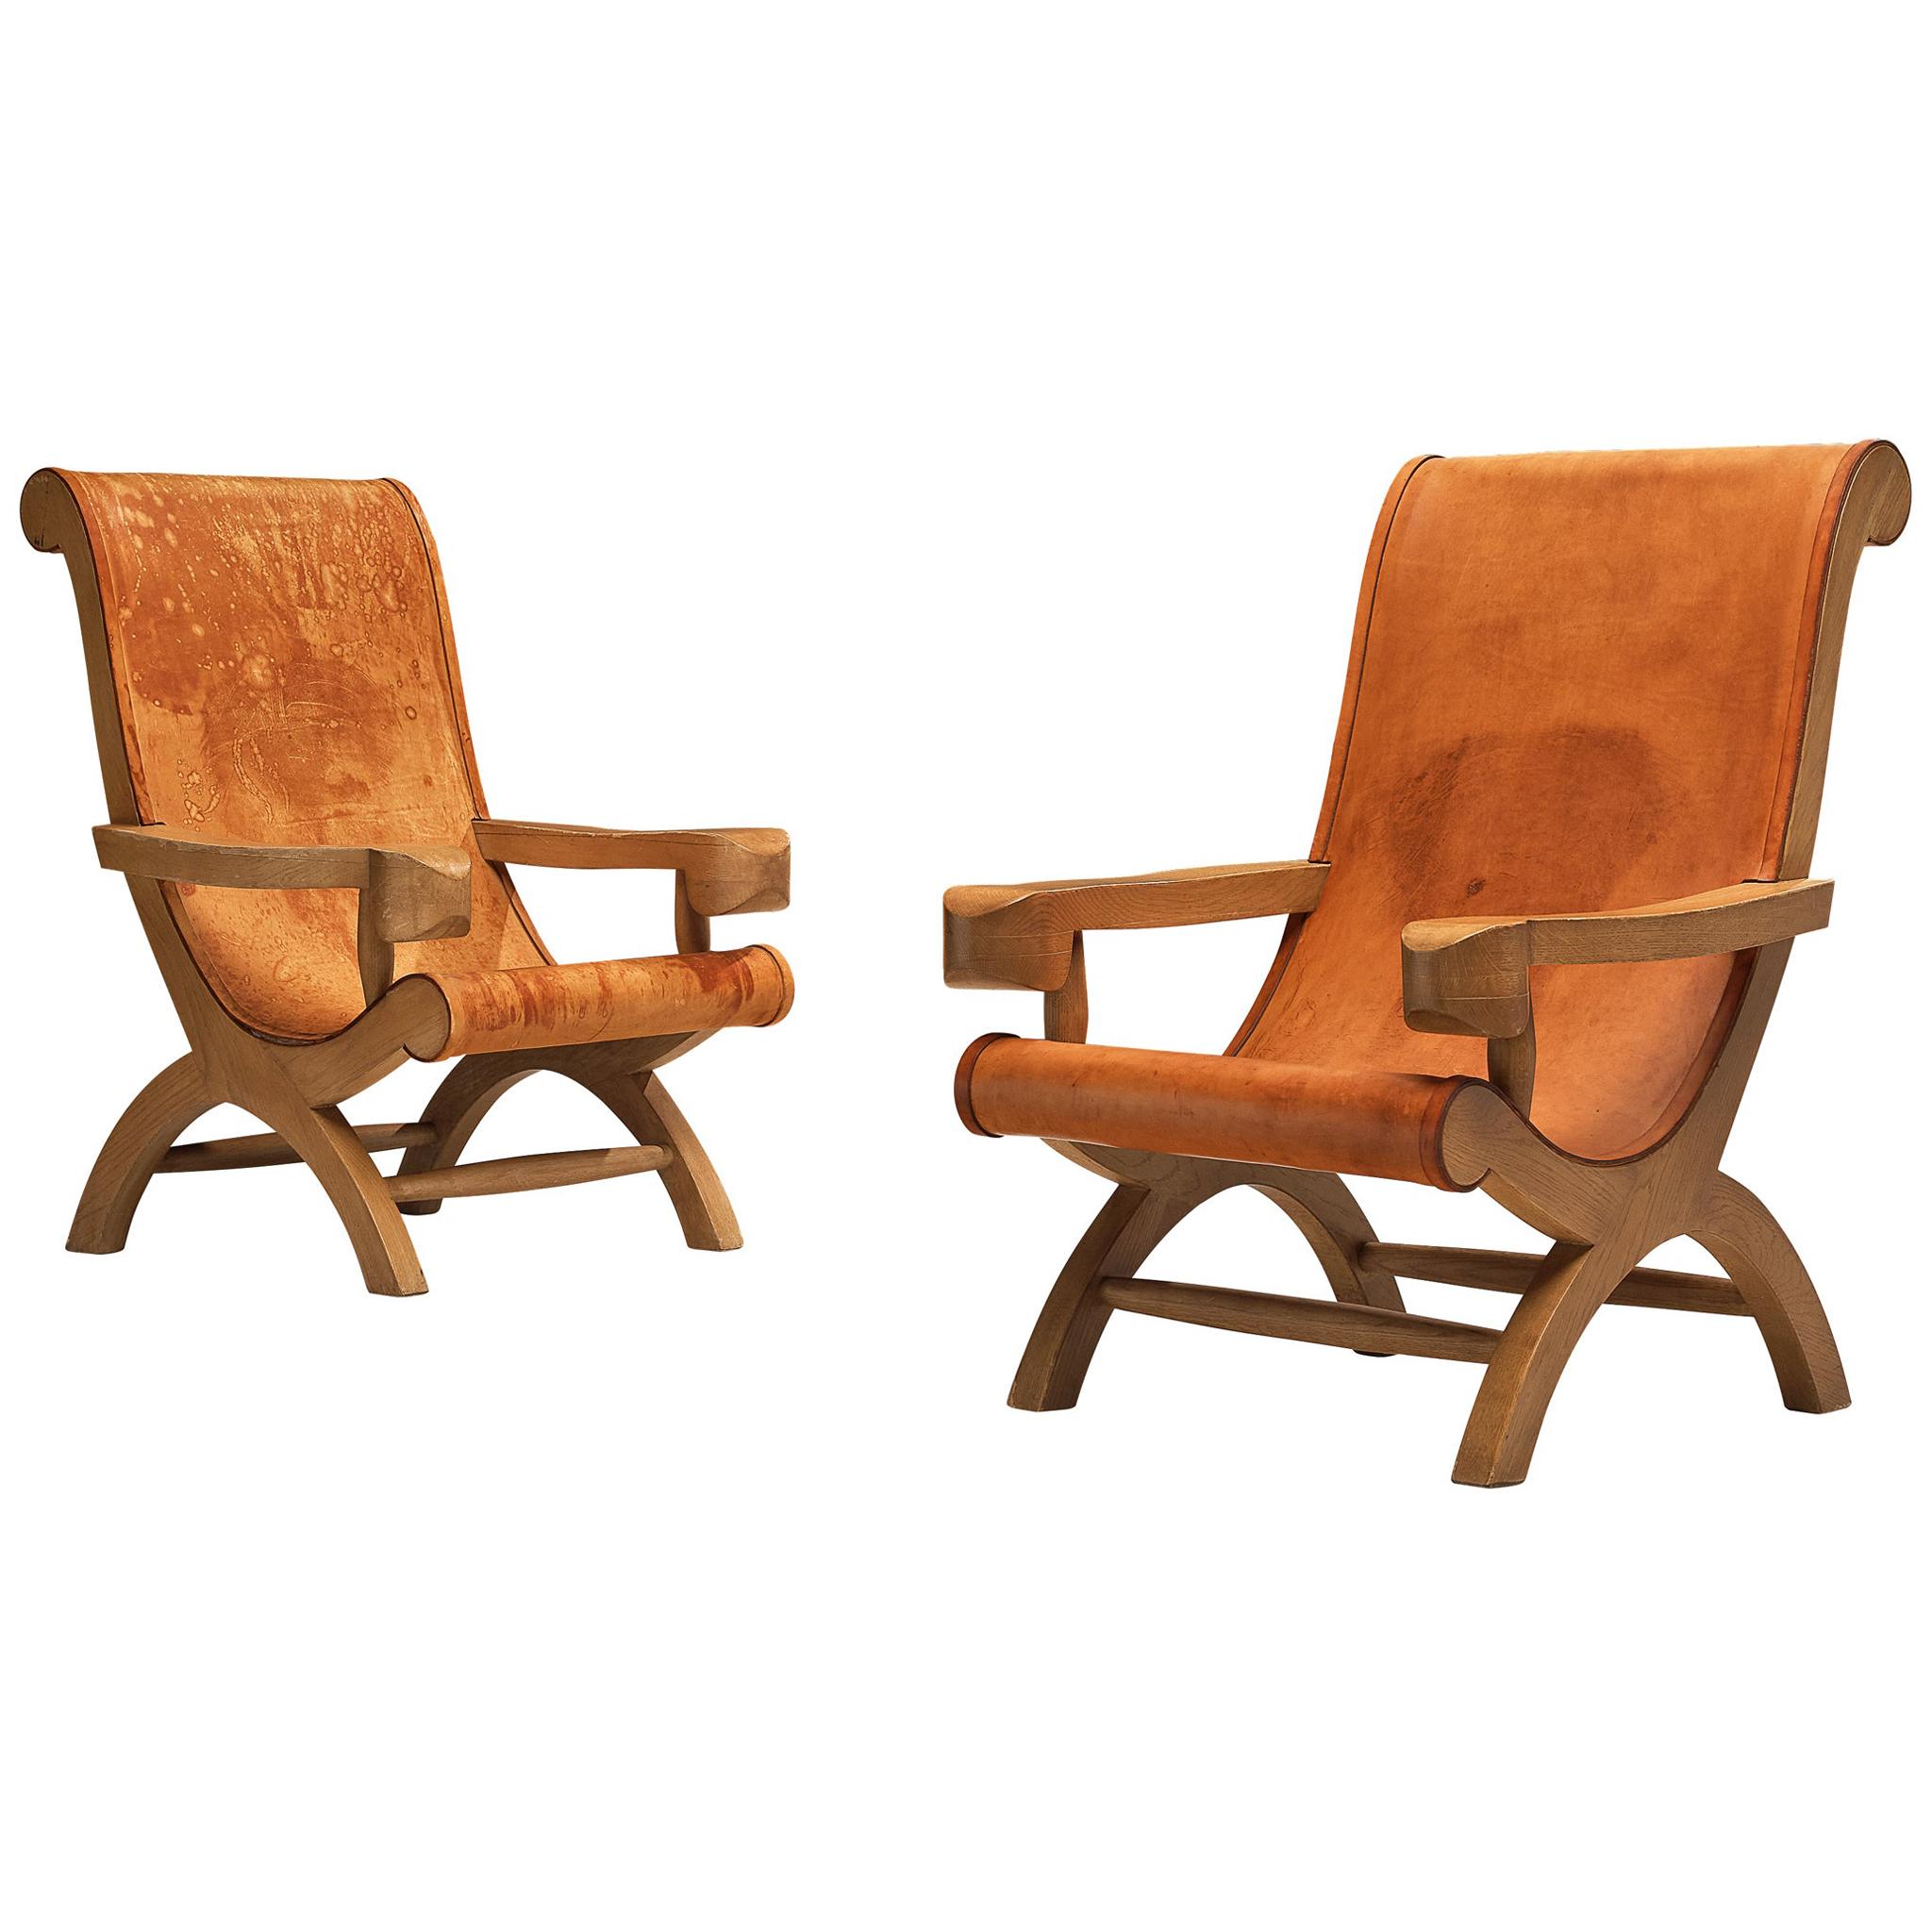 Pair of Clara Porset Lounge Chairs 'Butaque' in Original Patinated Leather